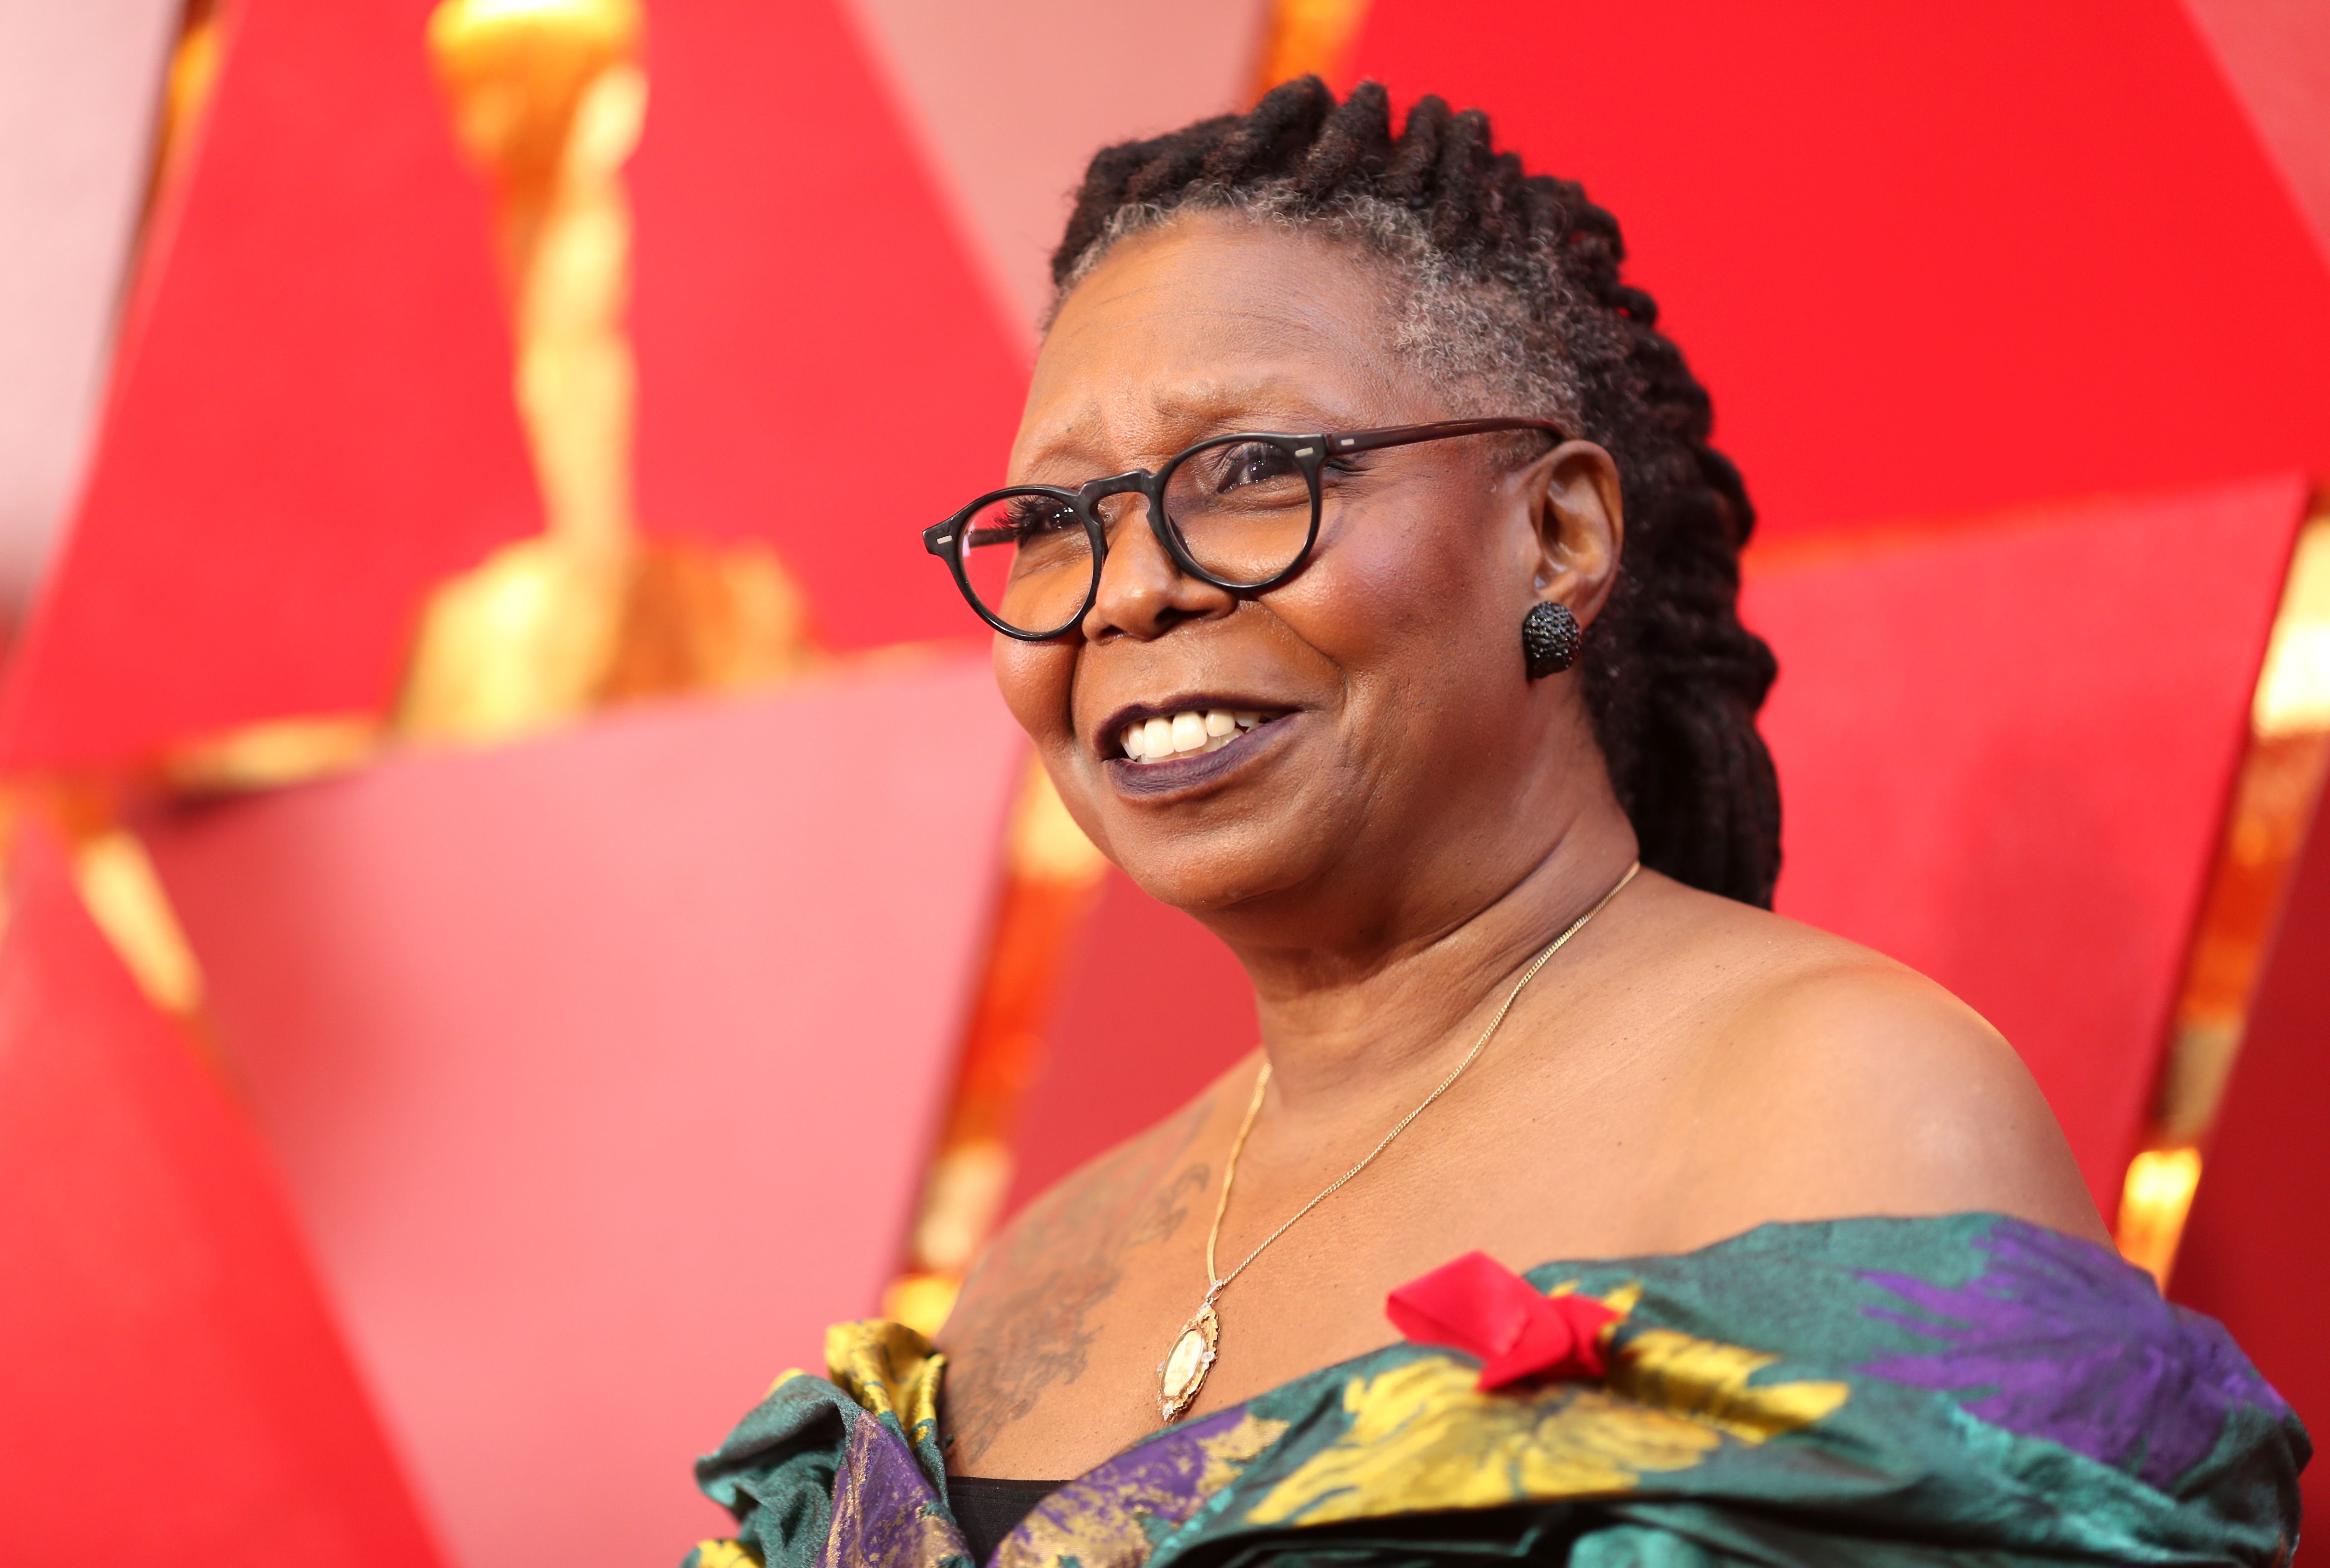 Whoopi Goldberg at the 90th Annual Academy Awards at Hollywood & Highland Center on March 4, 2018 | Photo: Getty Images